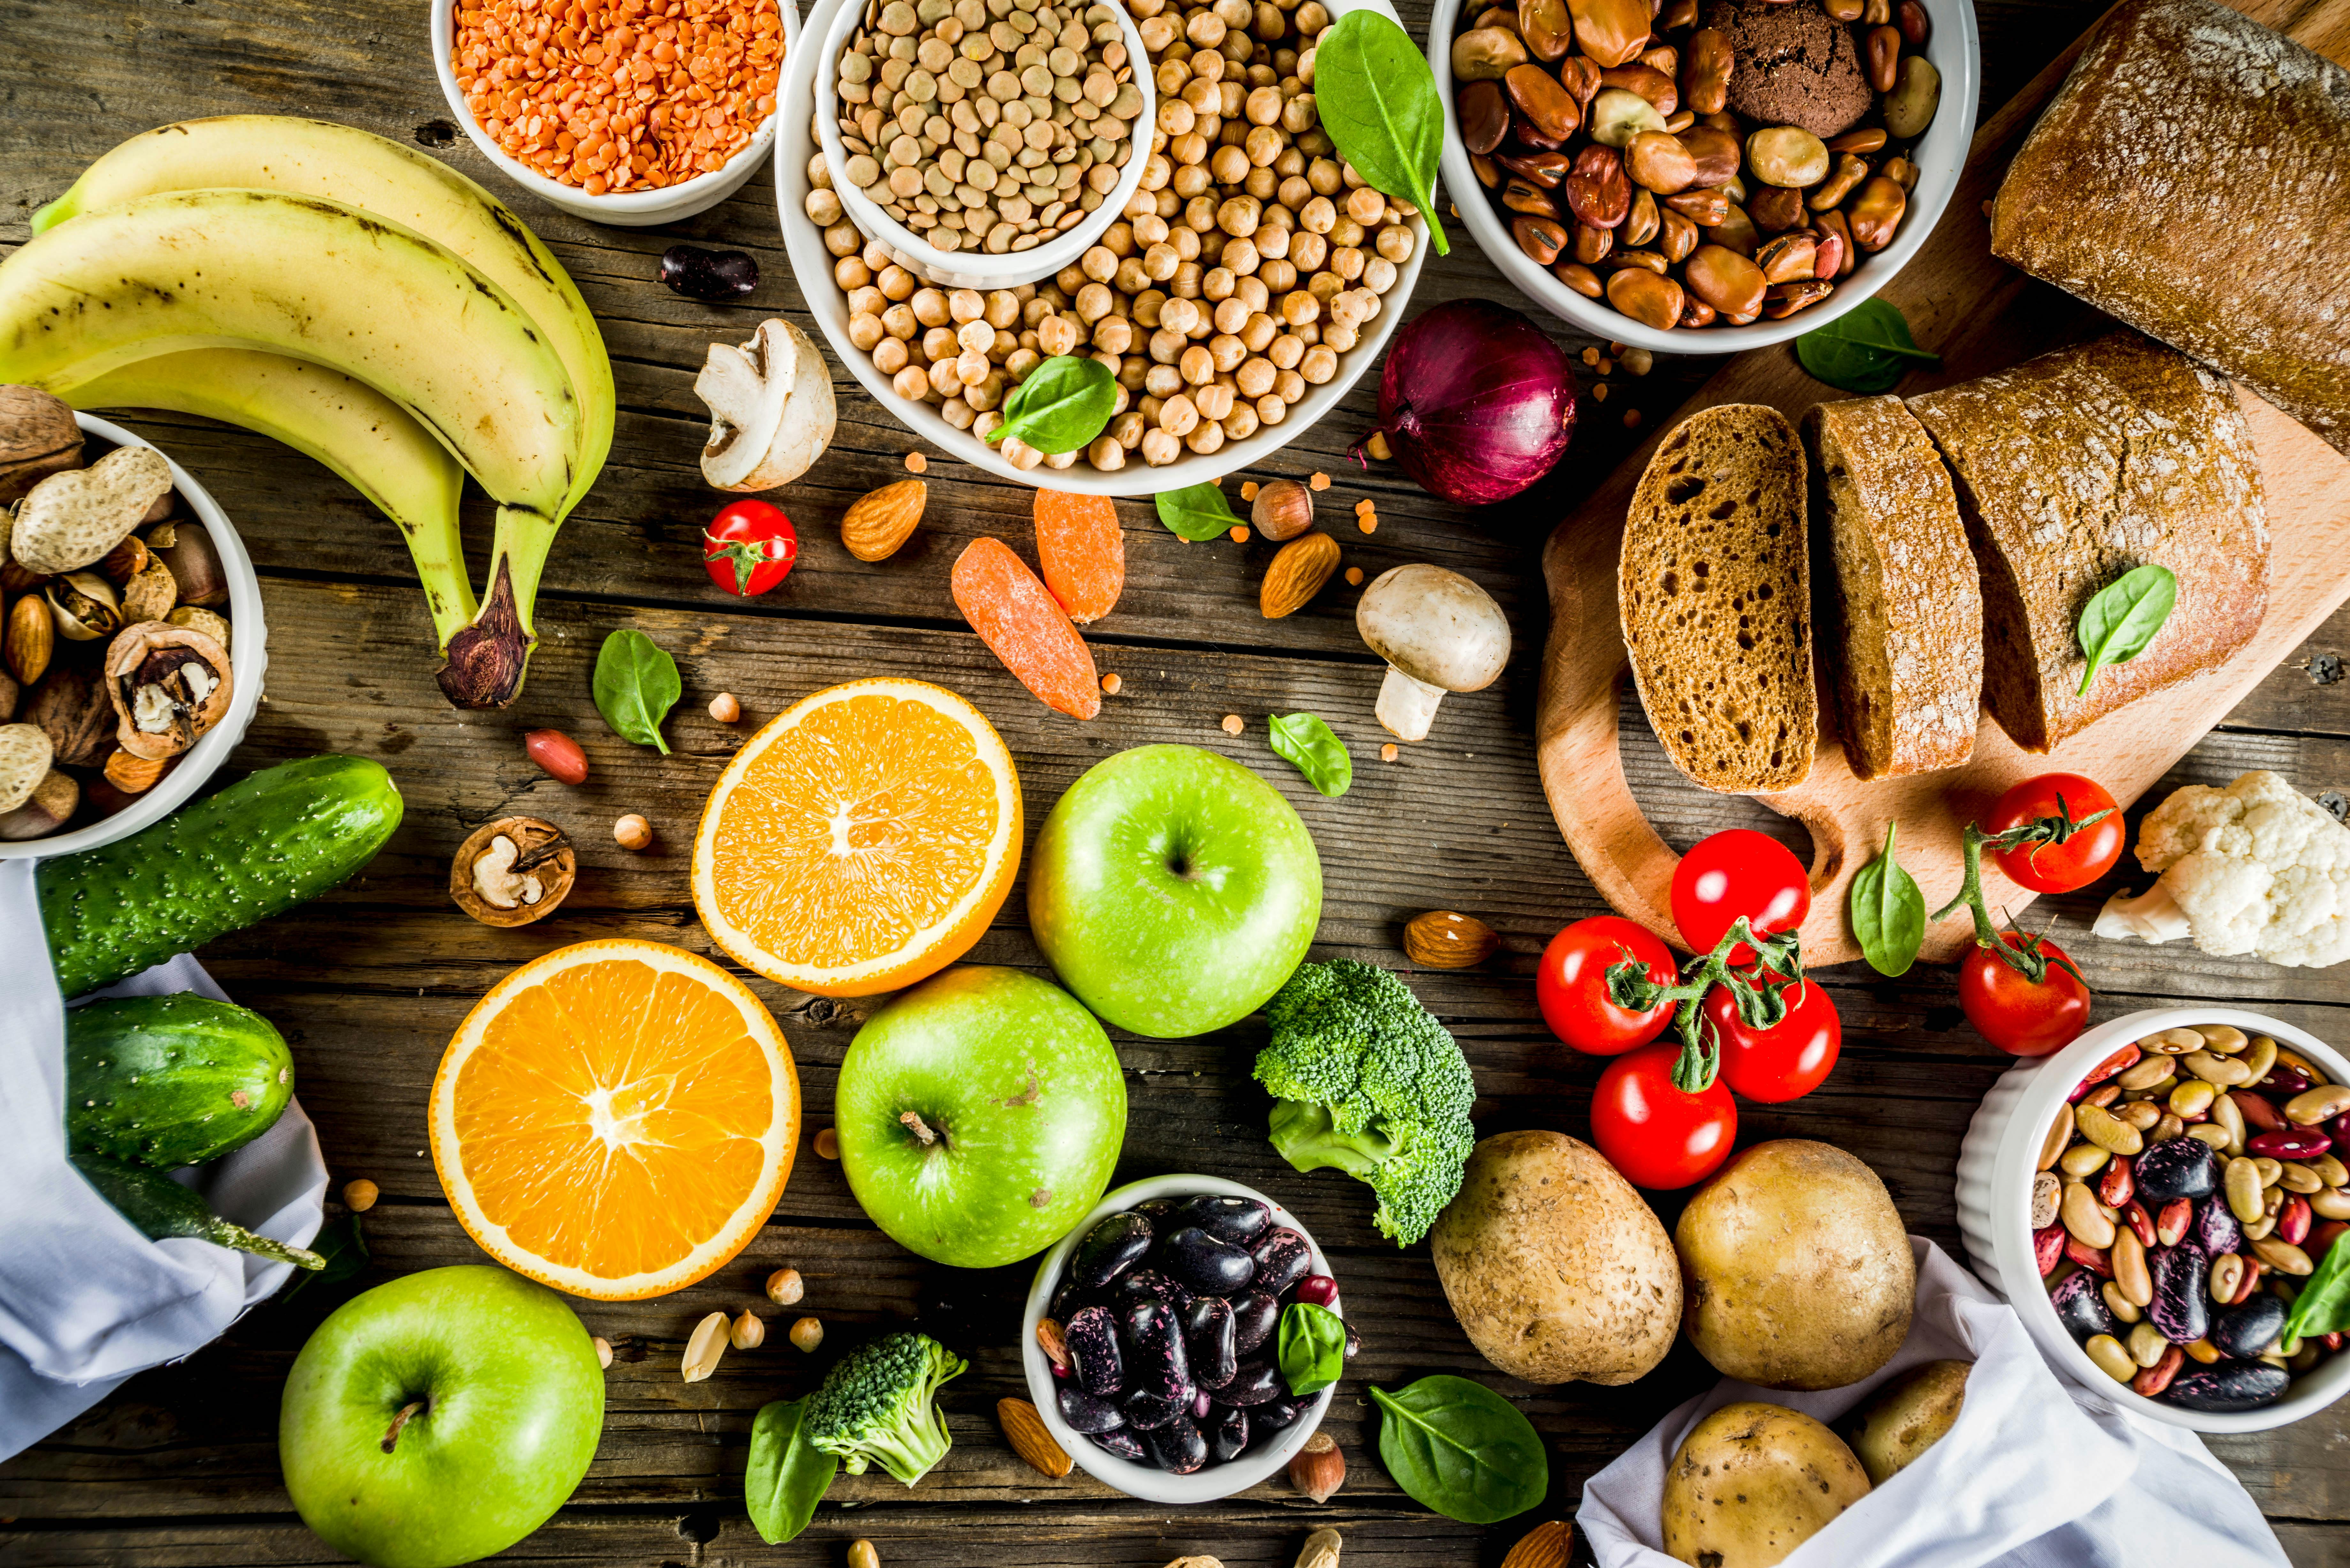 Fruits, veggies, whole grain bread, nuts, beans, and potatoes on a wooden table